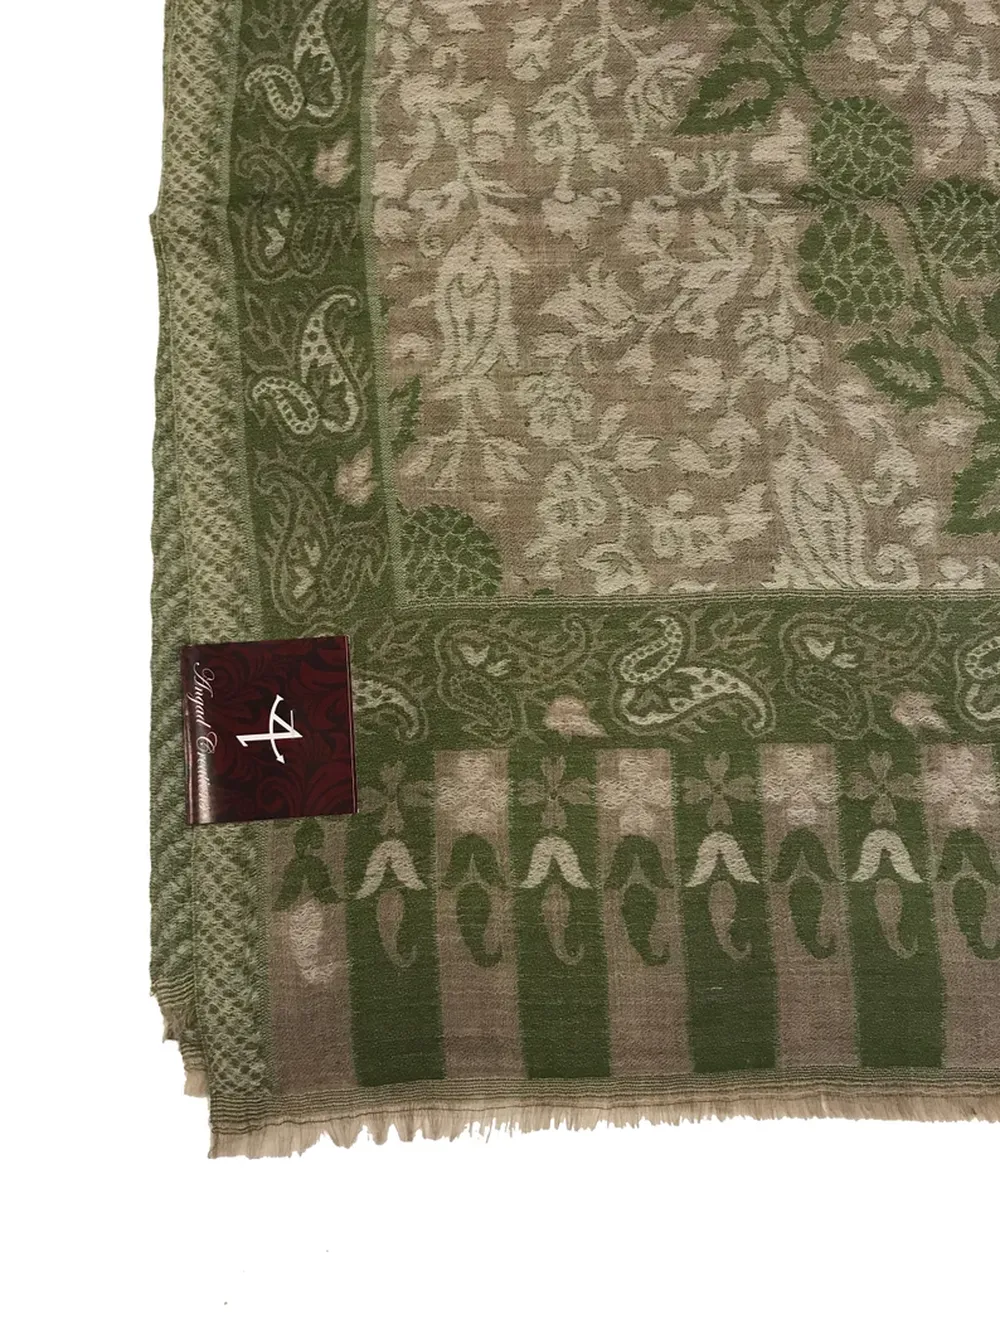 Fine Wool Kani Scarf with All Over Woven Design